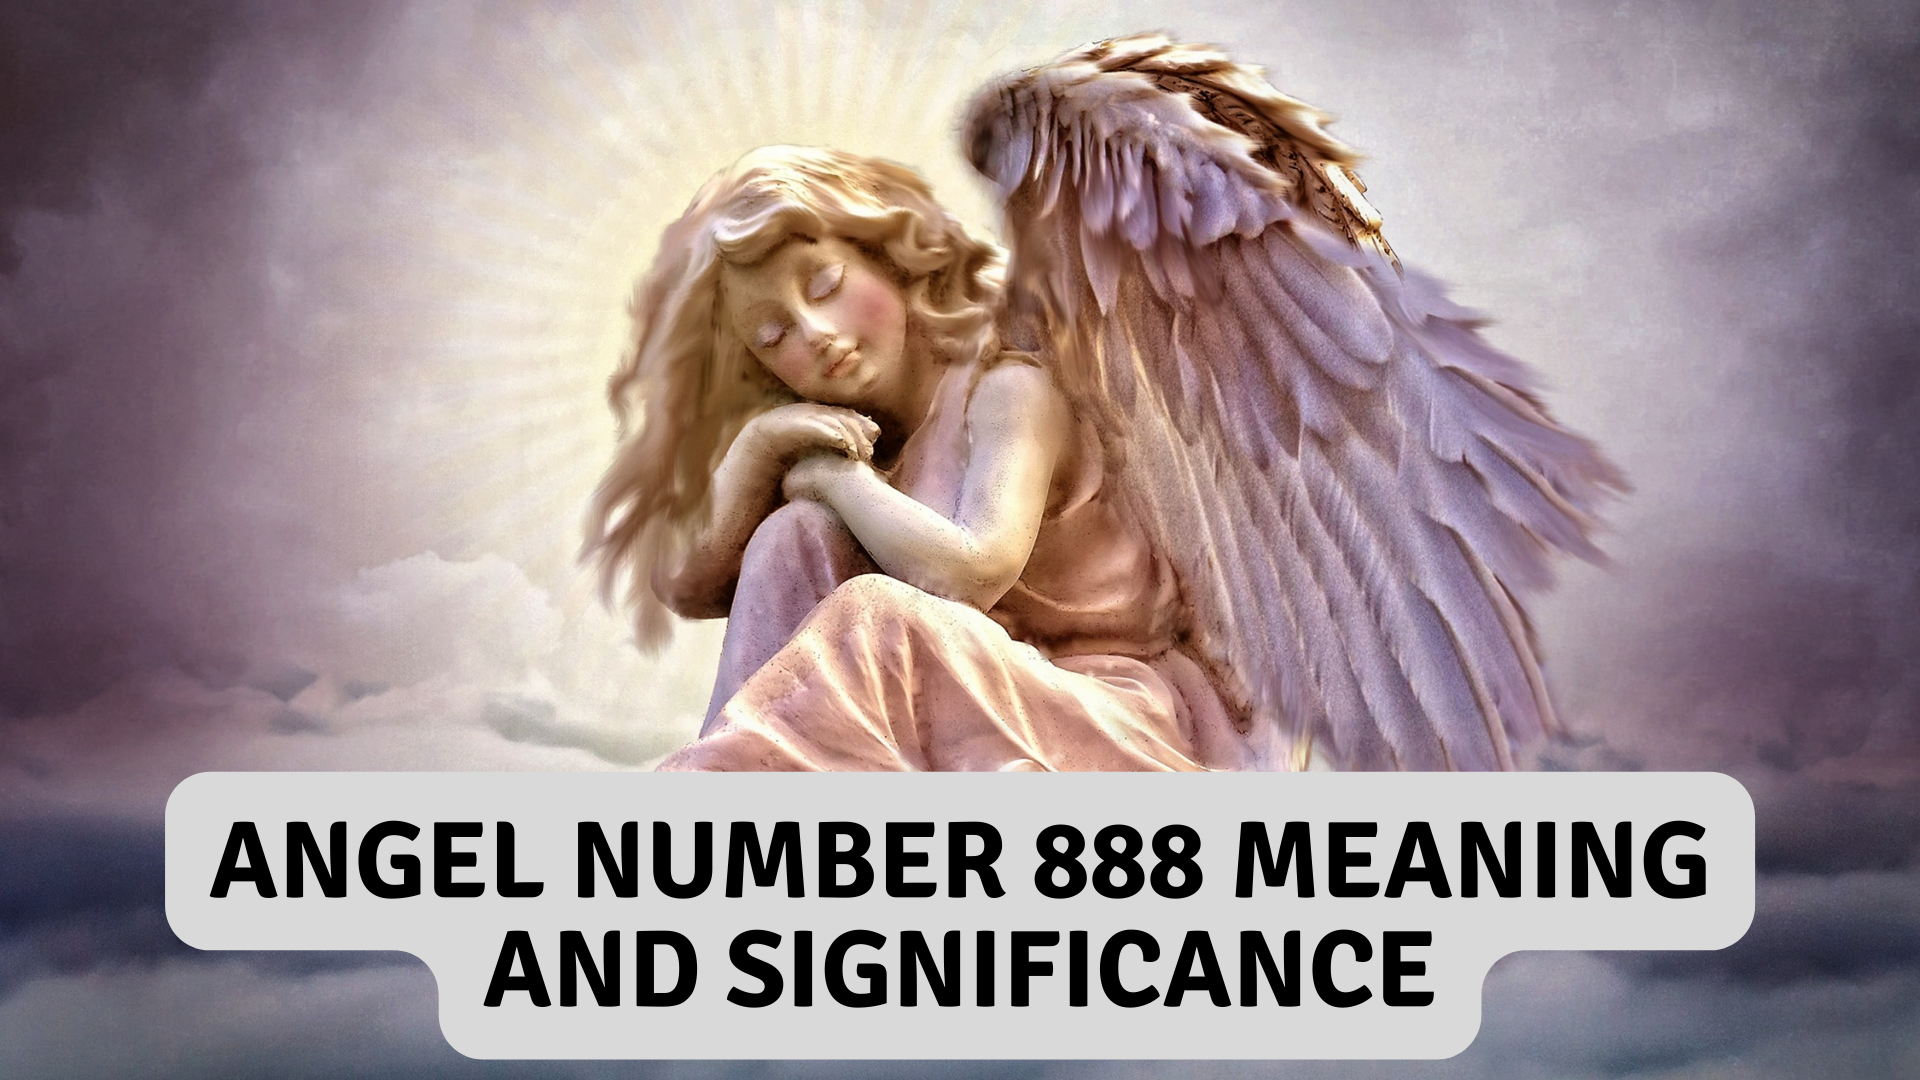 An angel sitting on the clouds while sleeping with words Angel Number 888 Meaning And Significance